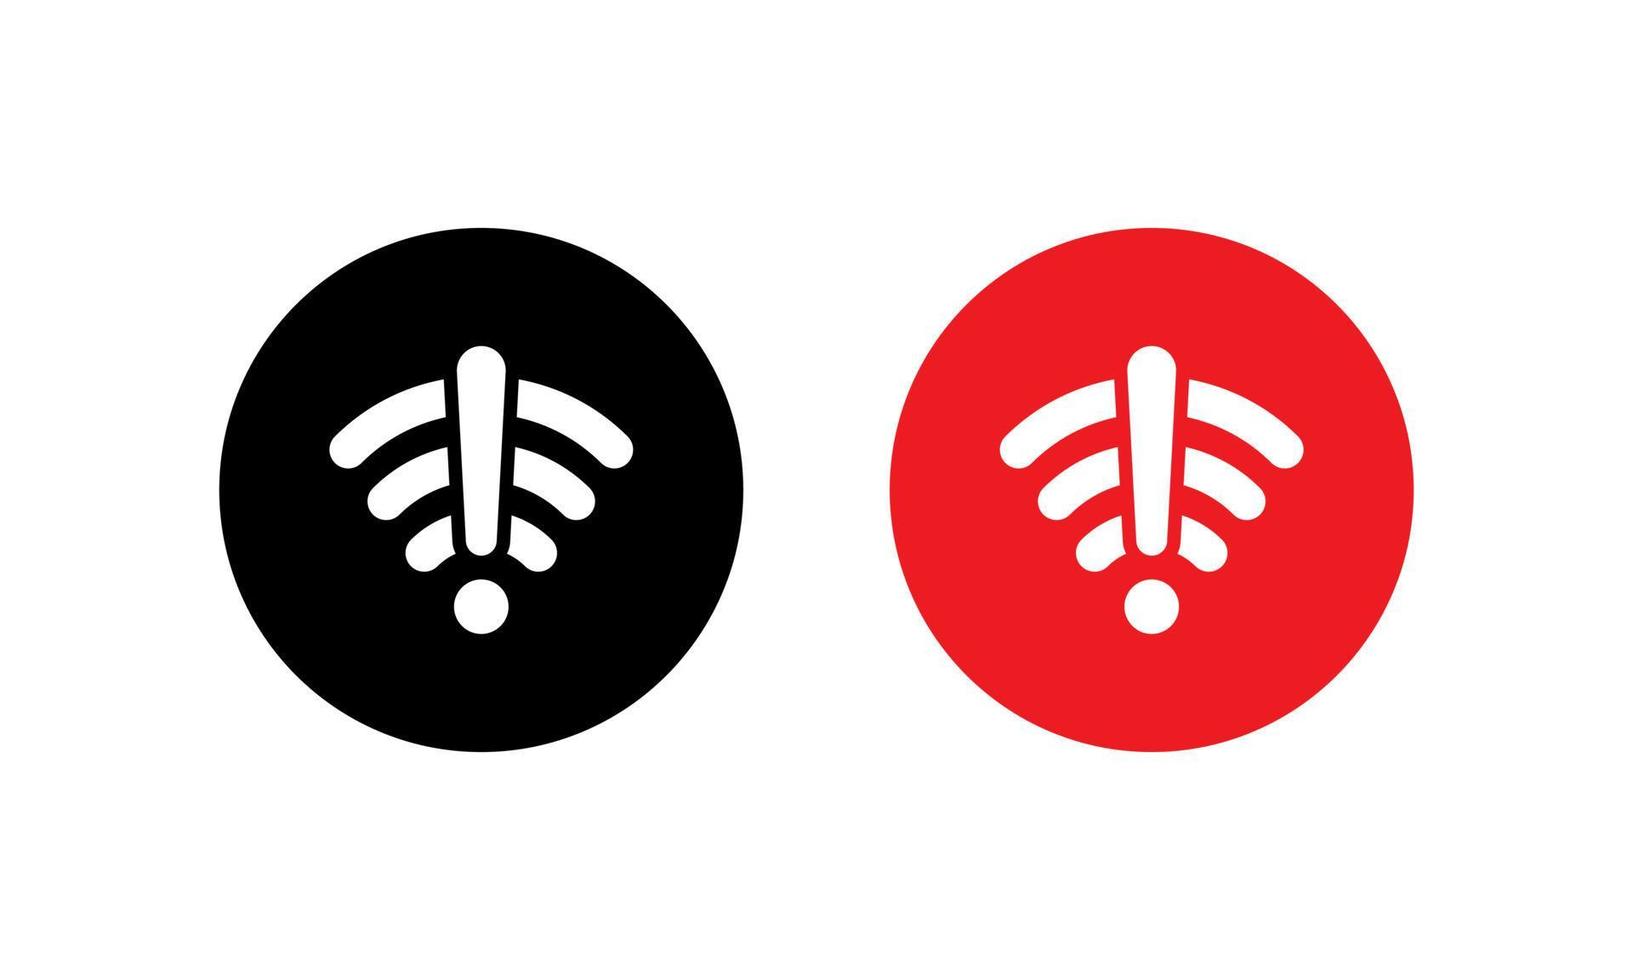 No Internet Connection, Offline Icon. Wifi Off with Exclamation Mark Symbol Vector